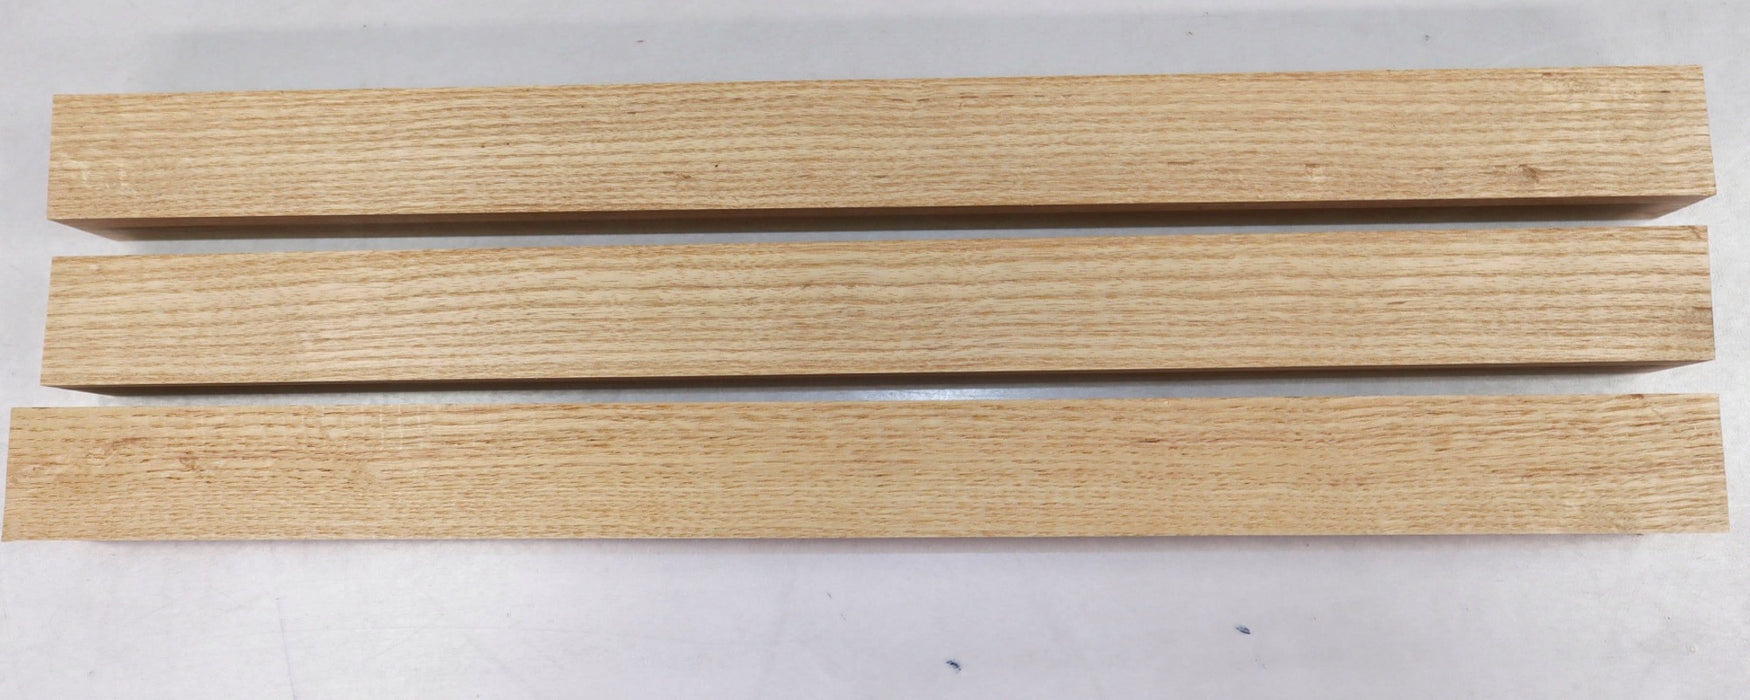 Swamp Ash spindles, 3 pieces 1.82" x 22.8" long - Stock# 2-9357